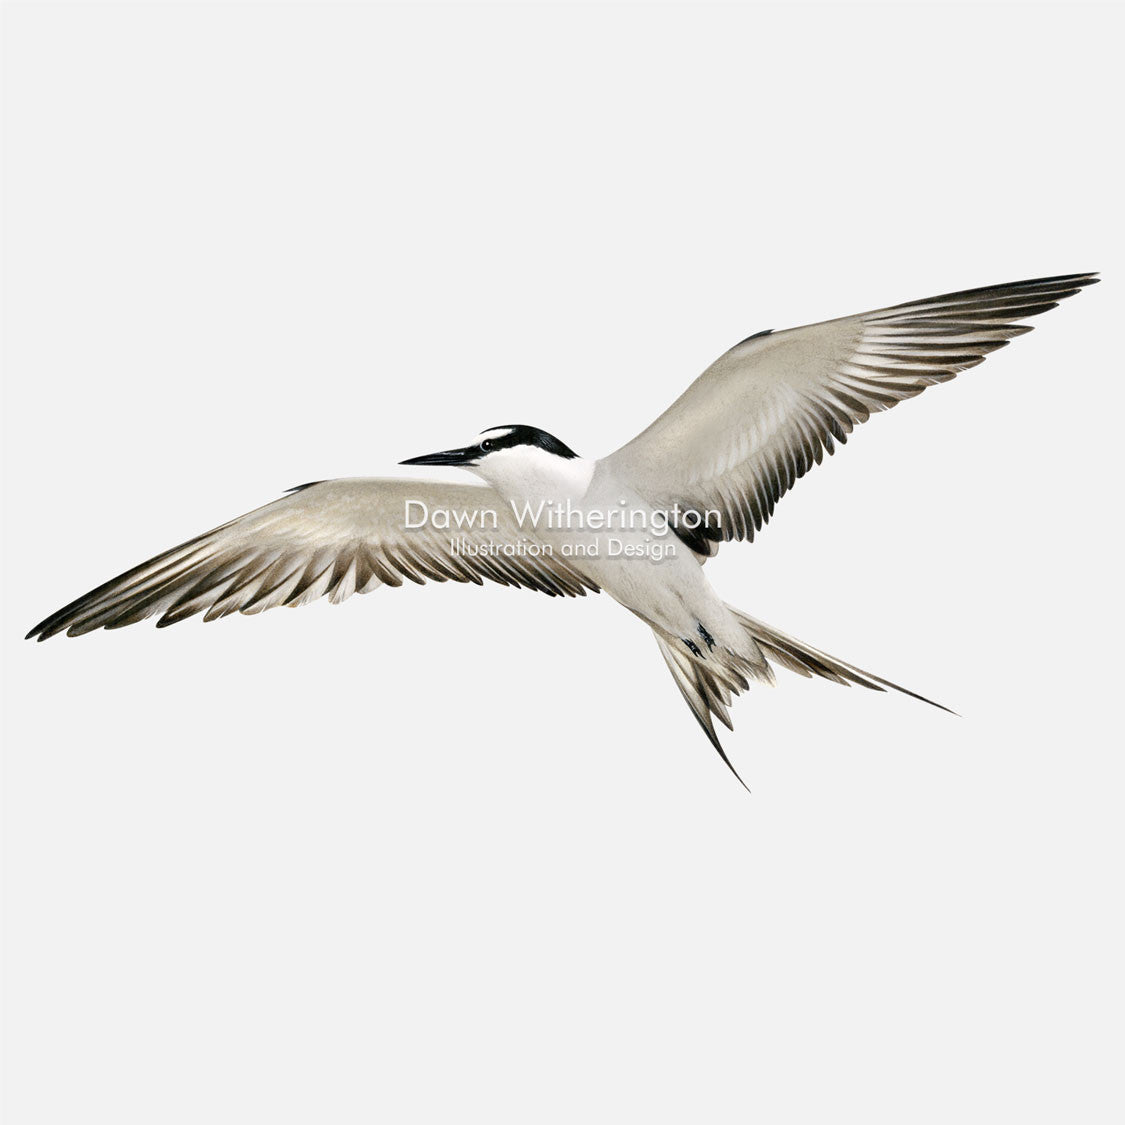 This beautiful illustration of a least tern, Sternula antillarum, in flight, is biologically accurate in detail.